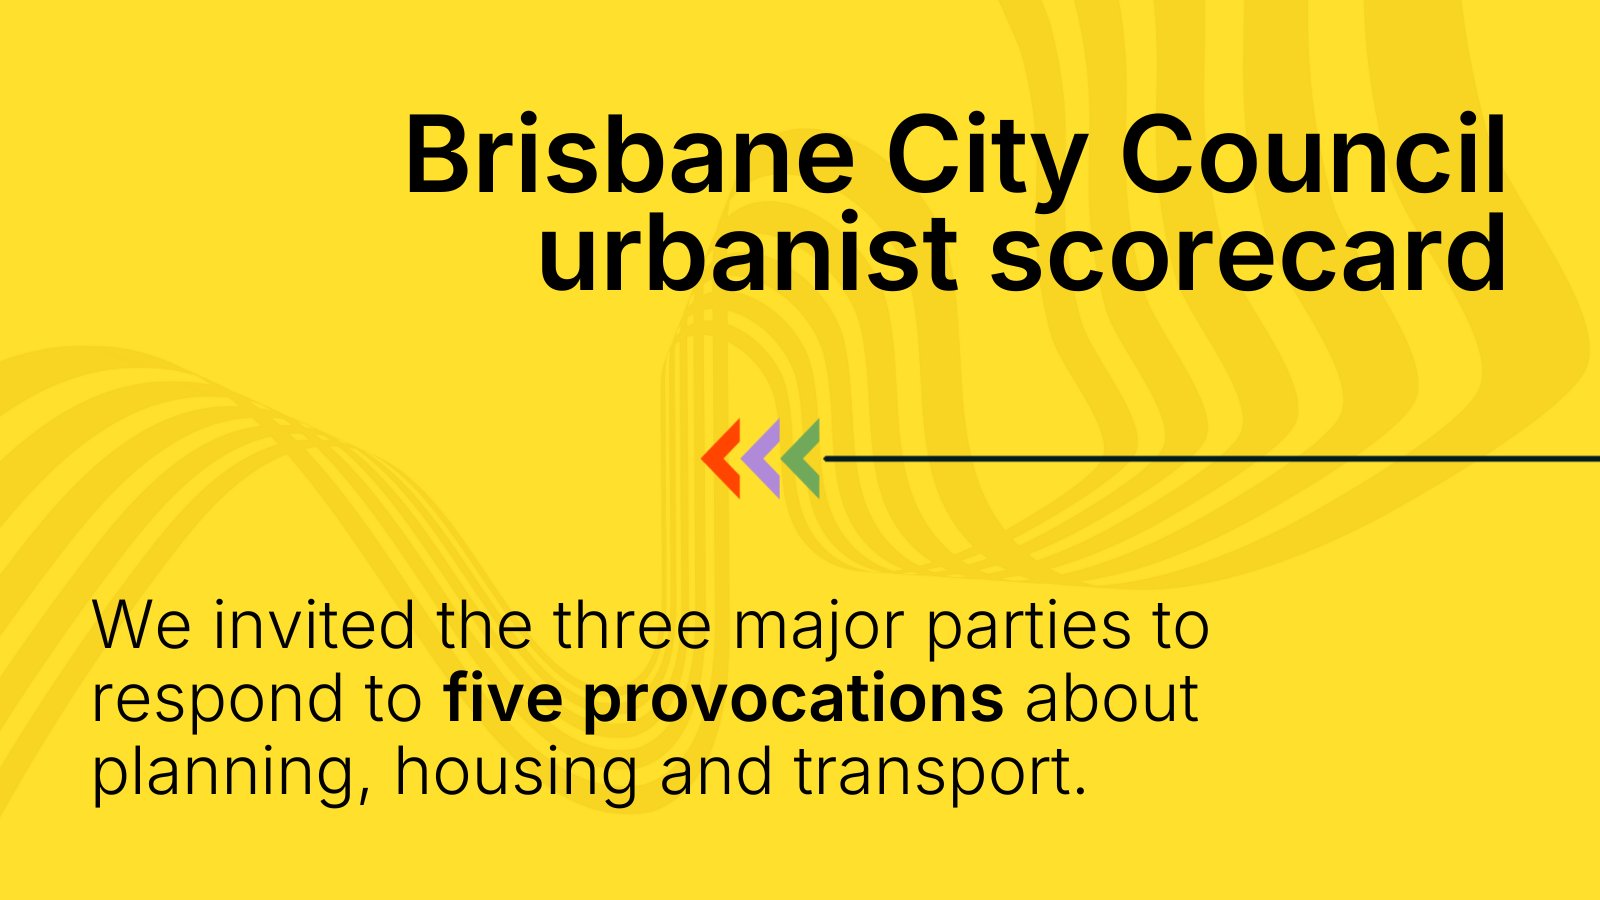 We invited the three major parties to respond to five provocations about
planning, housing and transport.